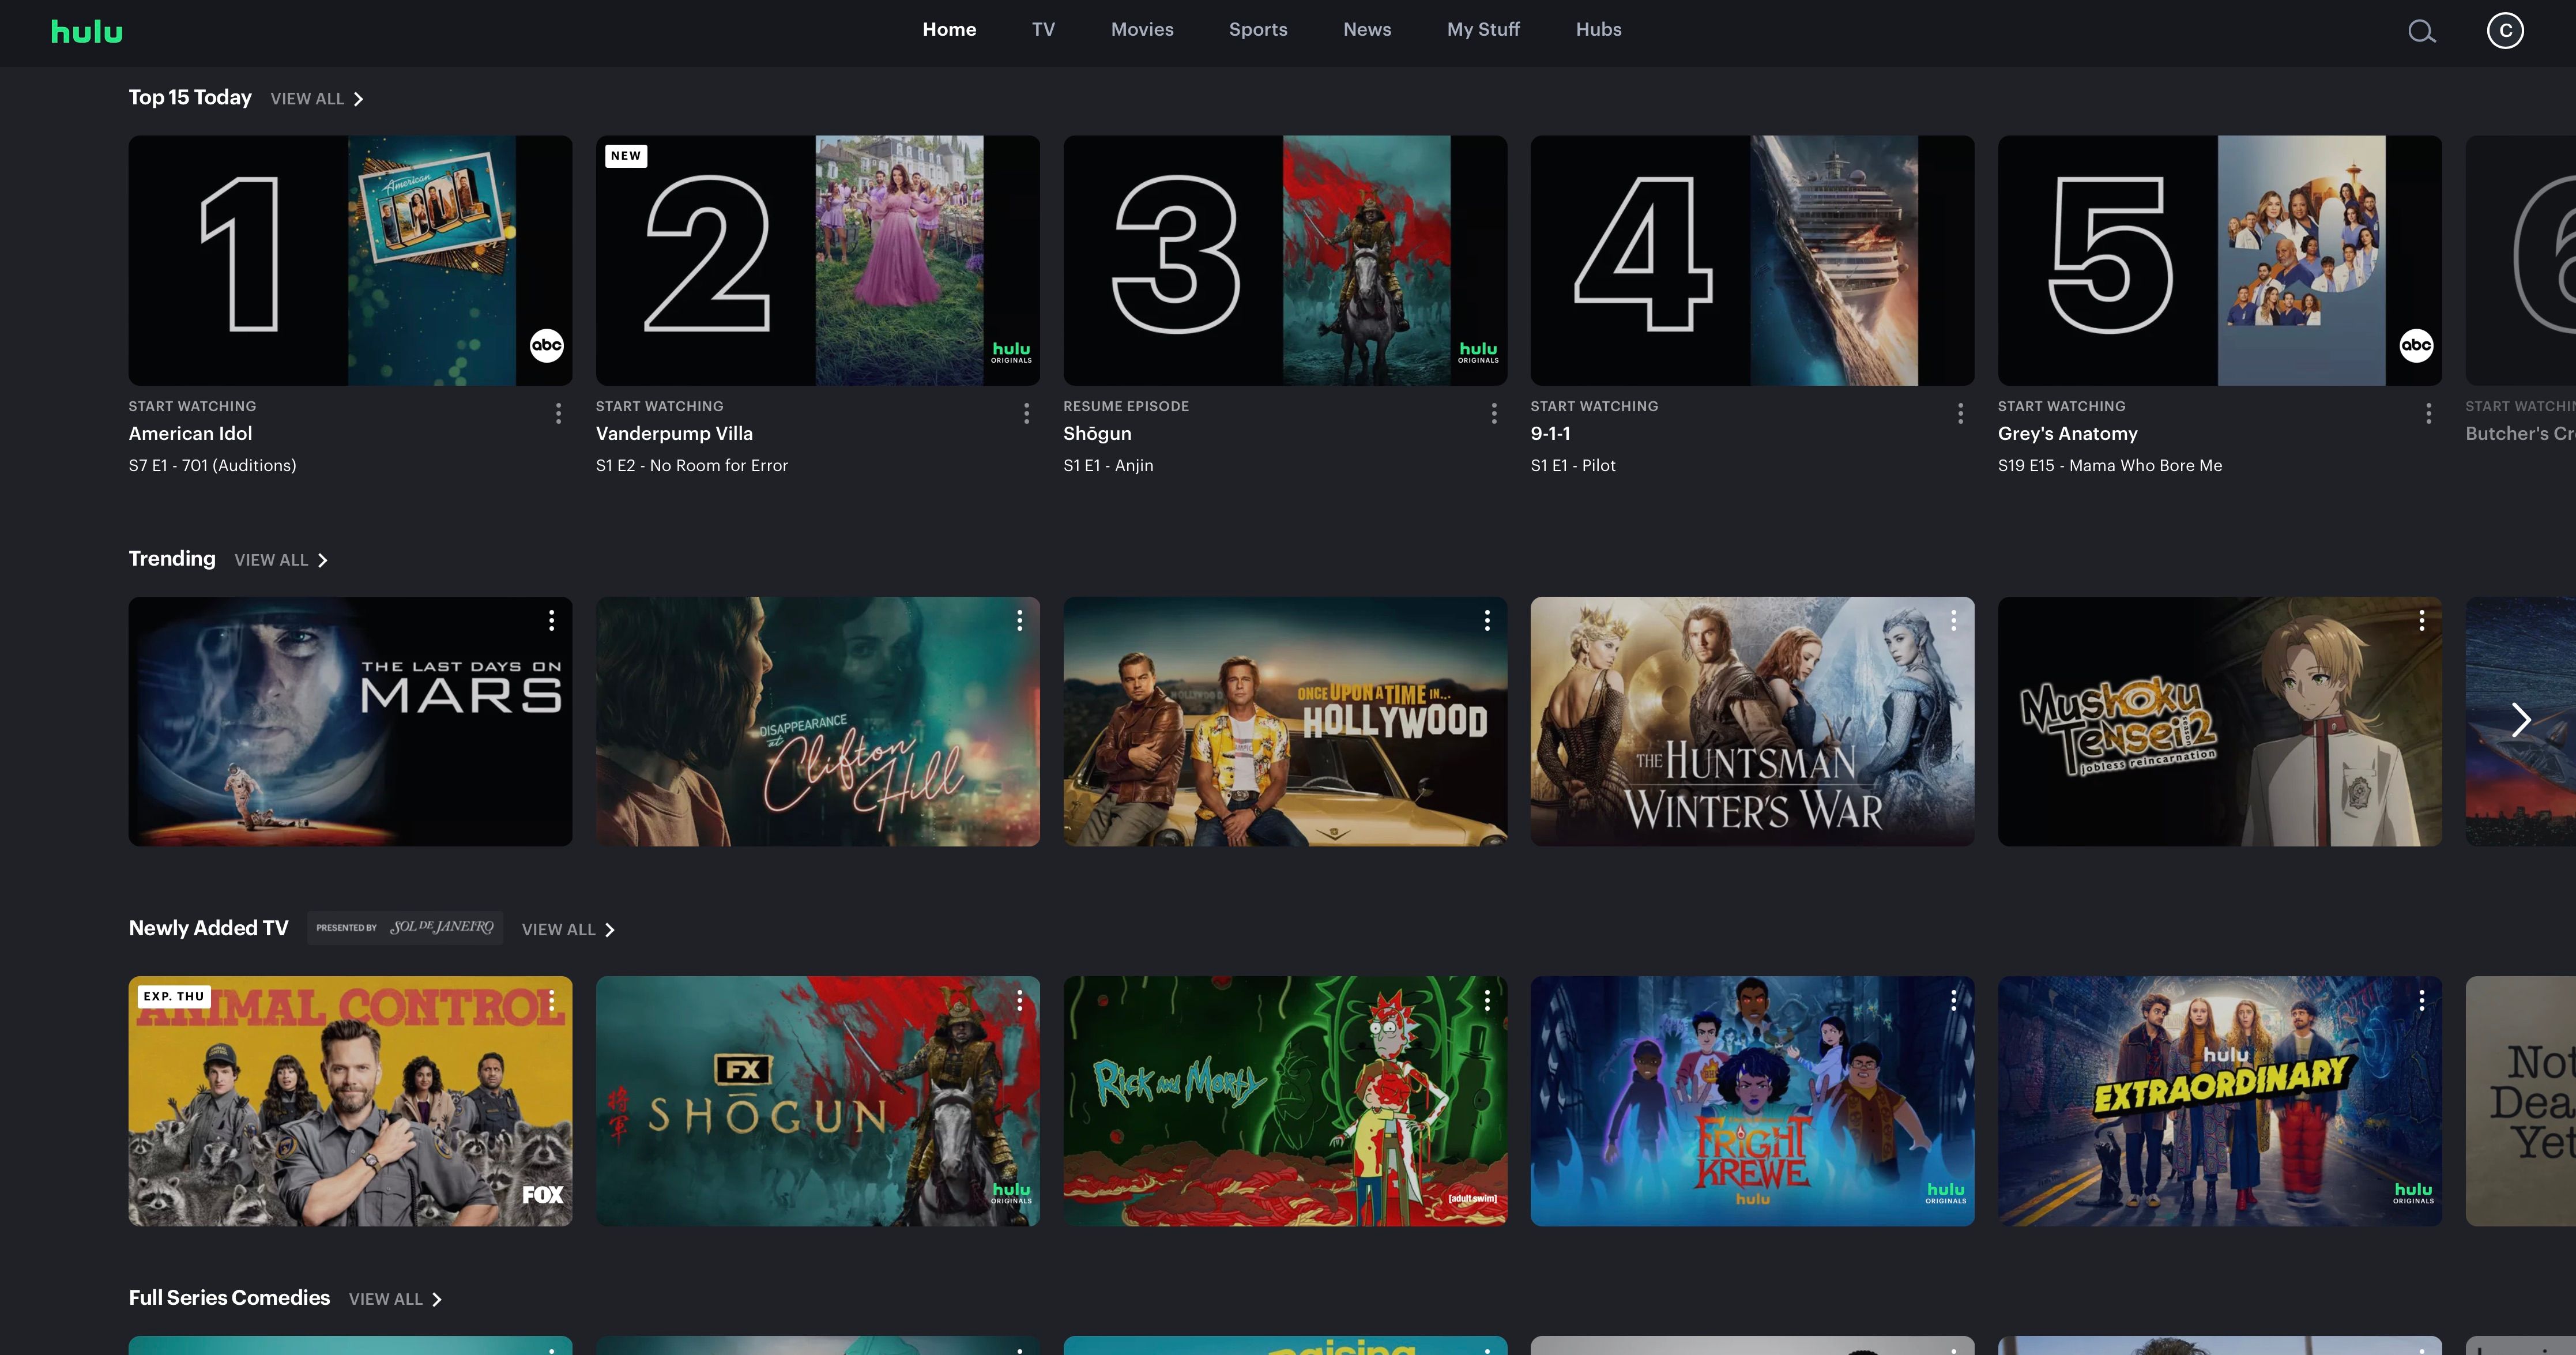 Hulu home screen with top 5 today list